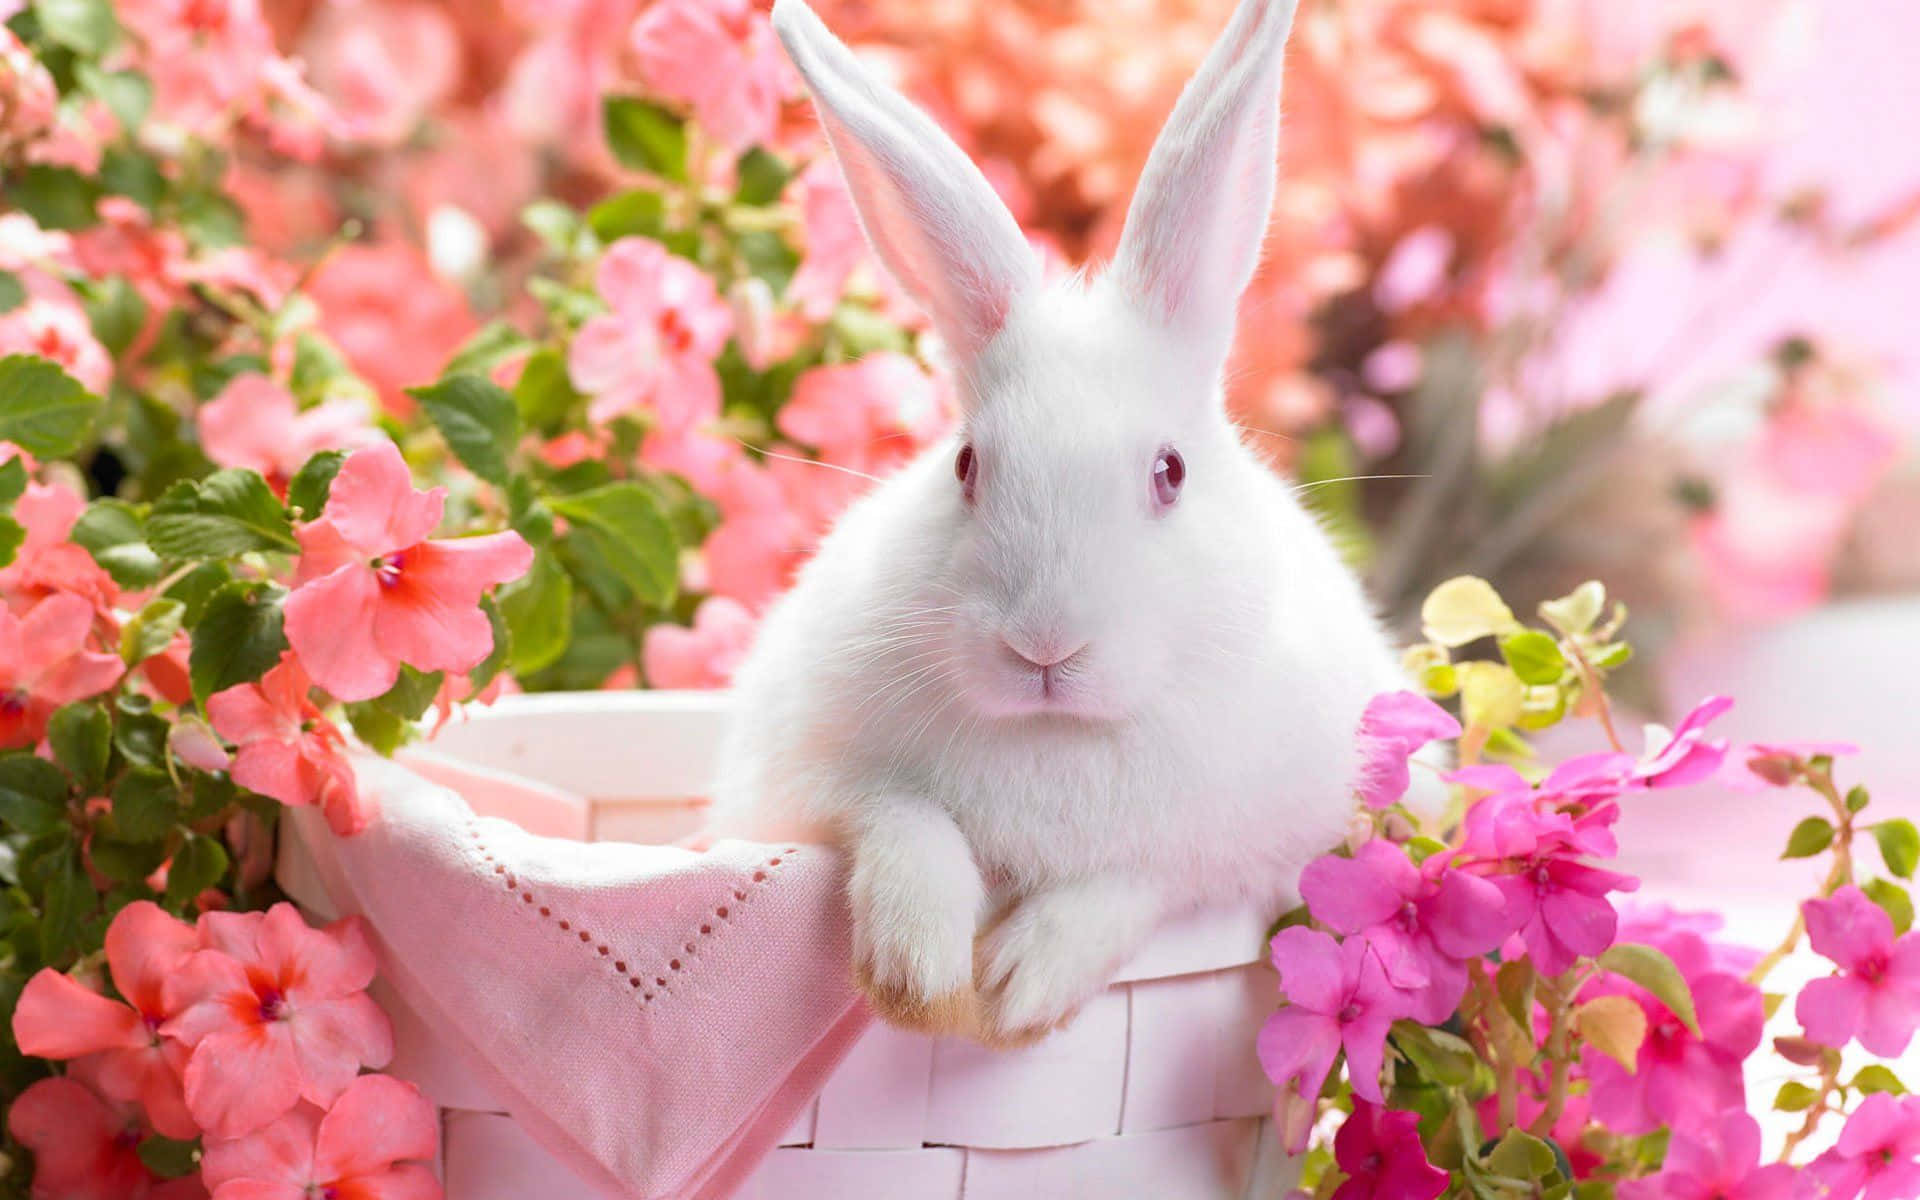 Come hop around with this cute pink bunny! Wallpaper